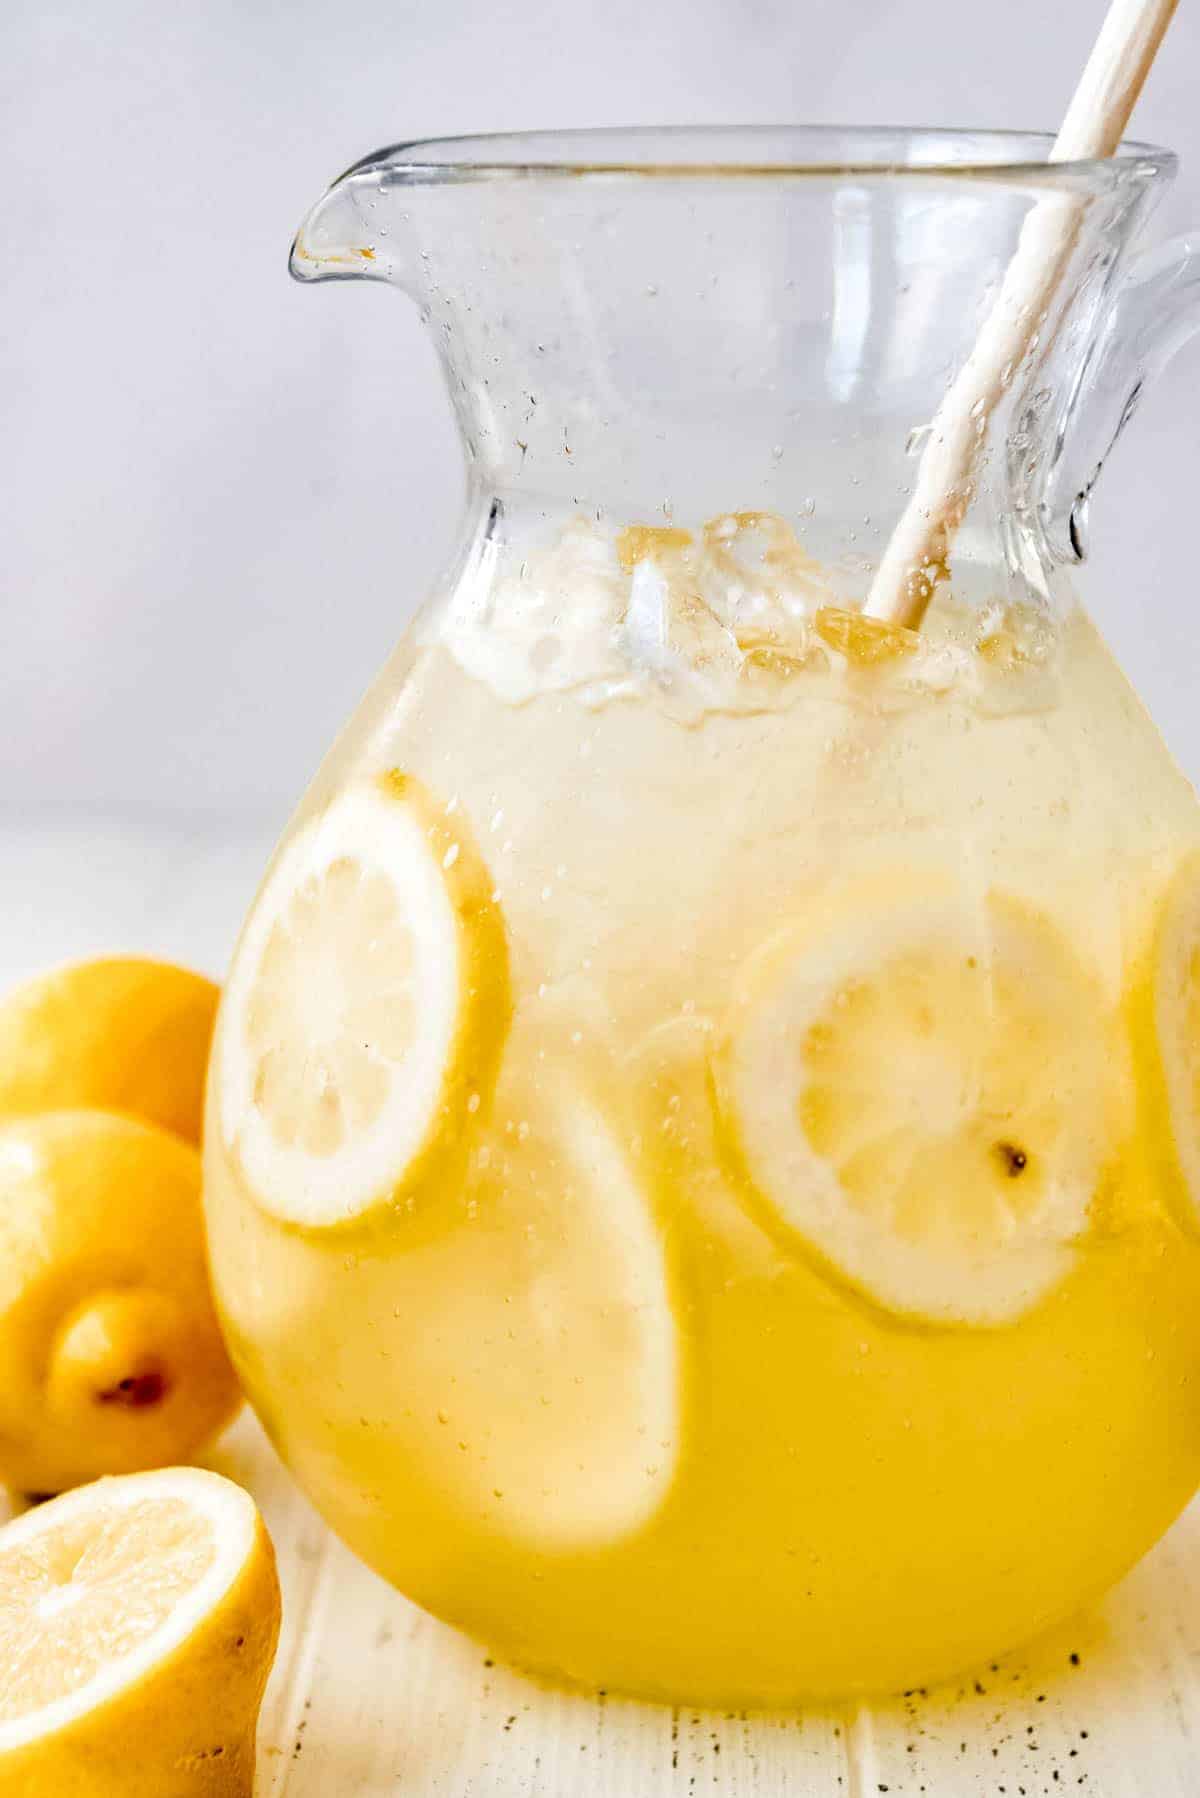 a close image of a glass pitcher filled with ice, sliced lemons, and lemonade